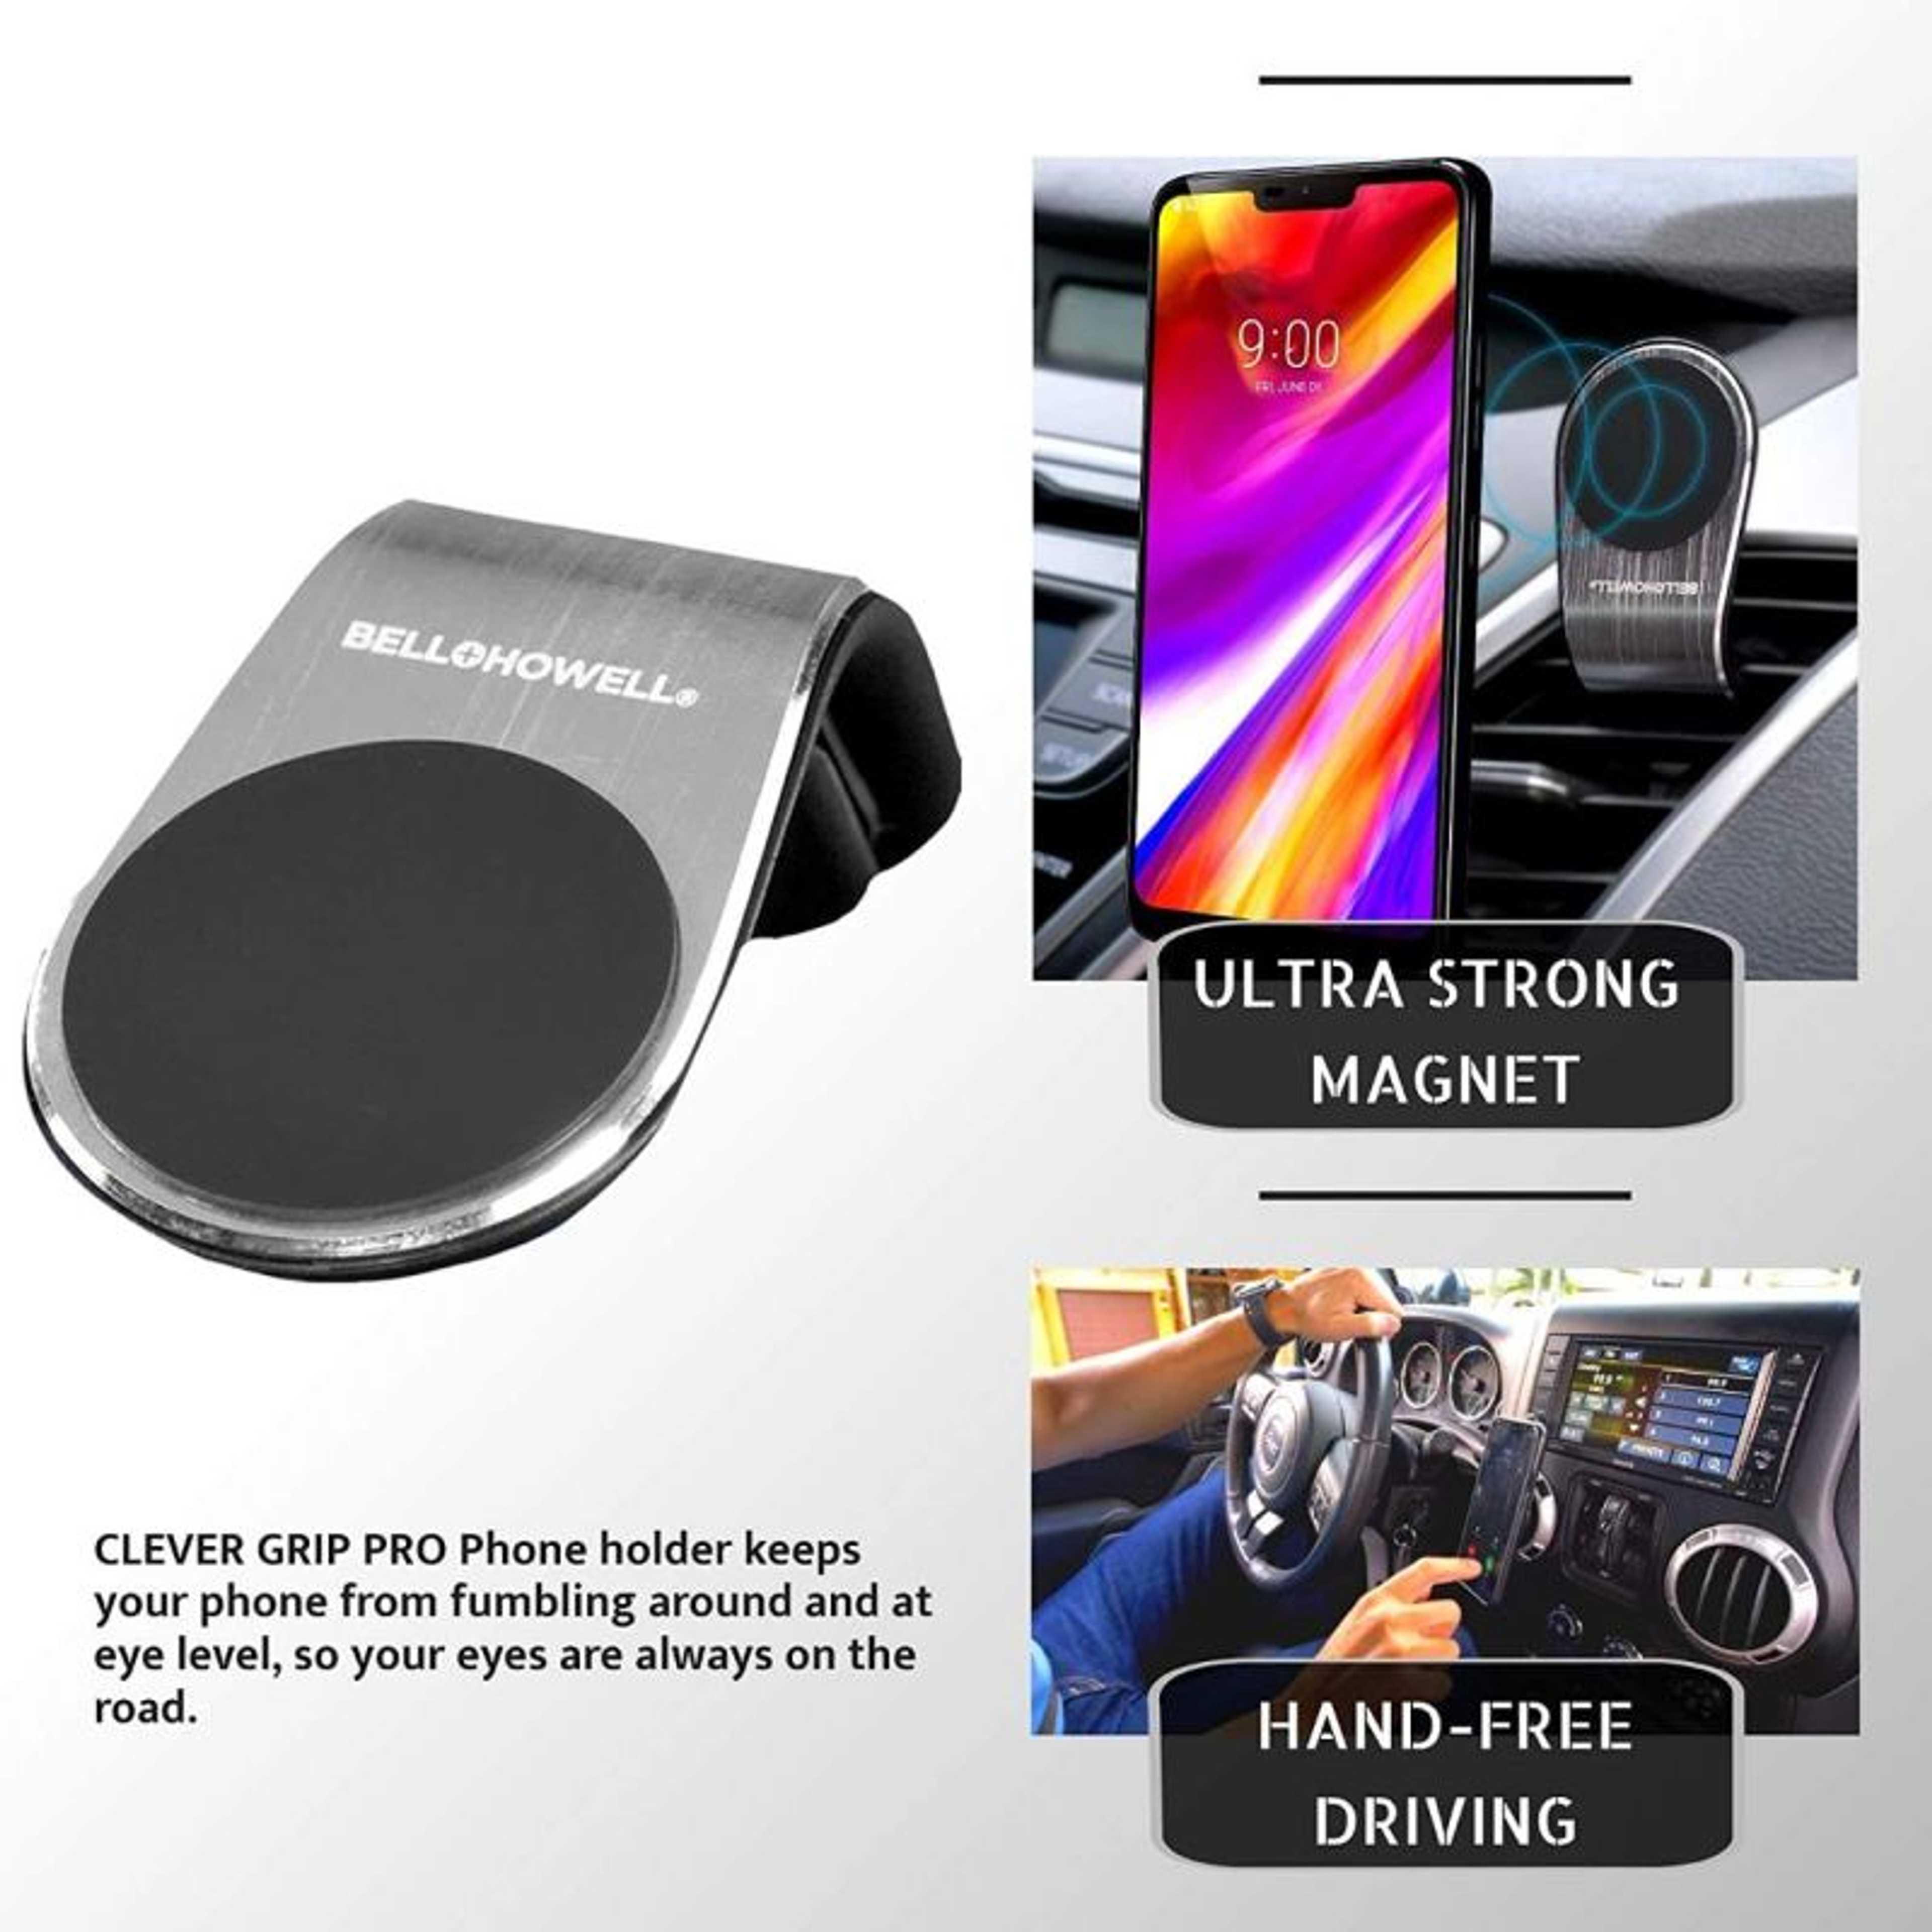 Bell+Howell Clever Grip Pro Universal Air Vent Magnetic Smart Phone Holder for Car, Rotates 360 with Strong Grip and Powerful Magnet